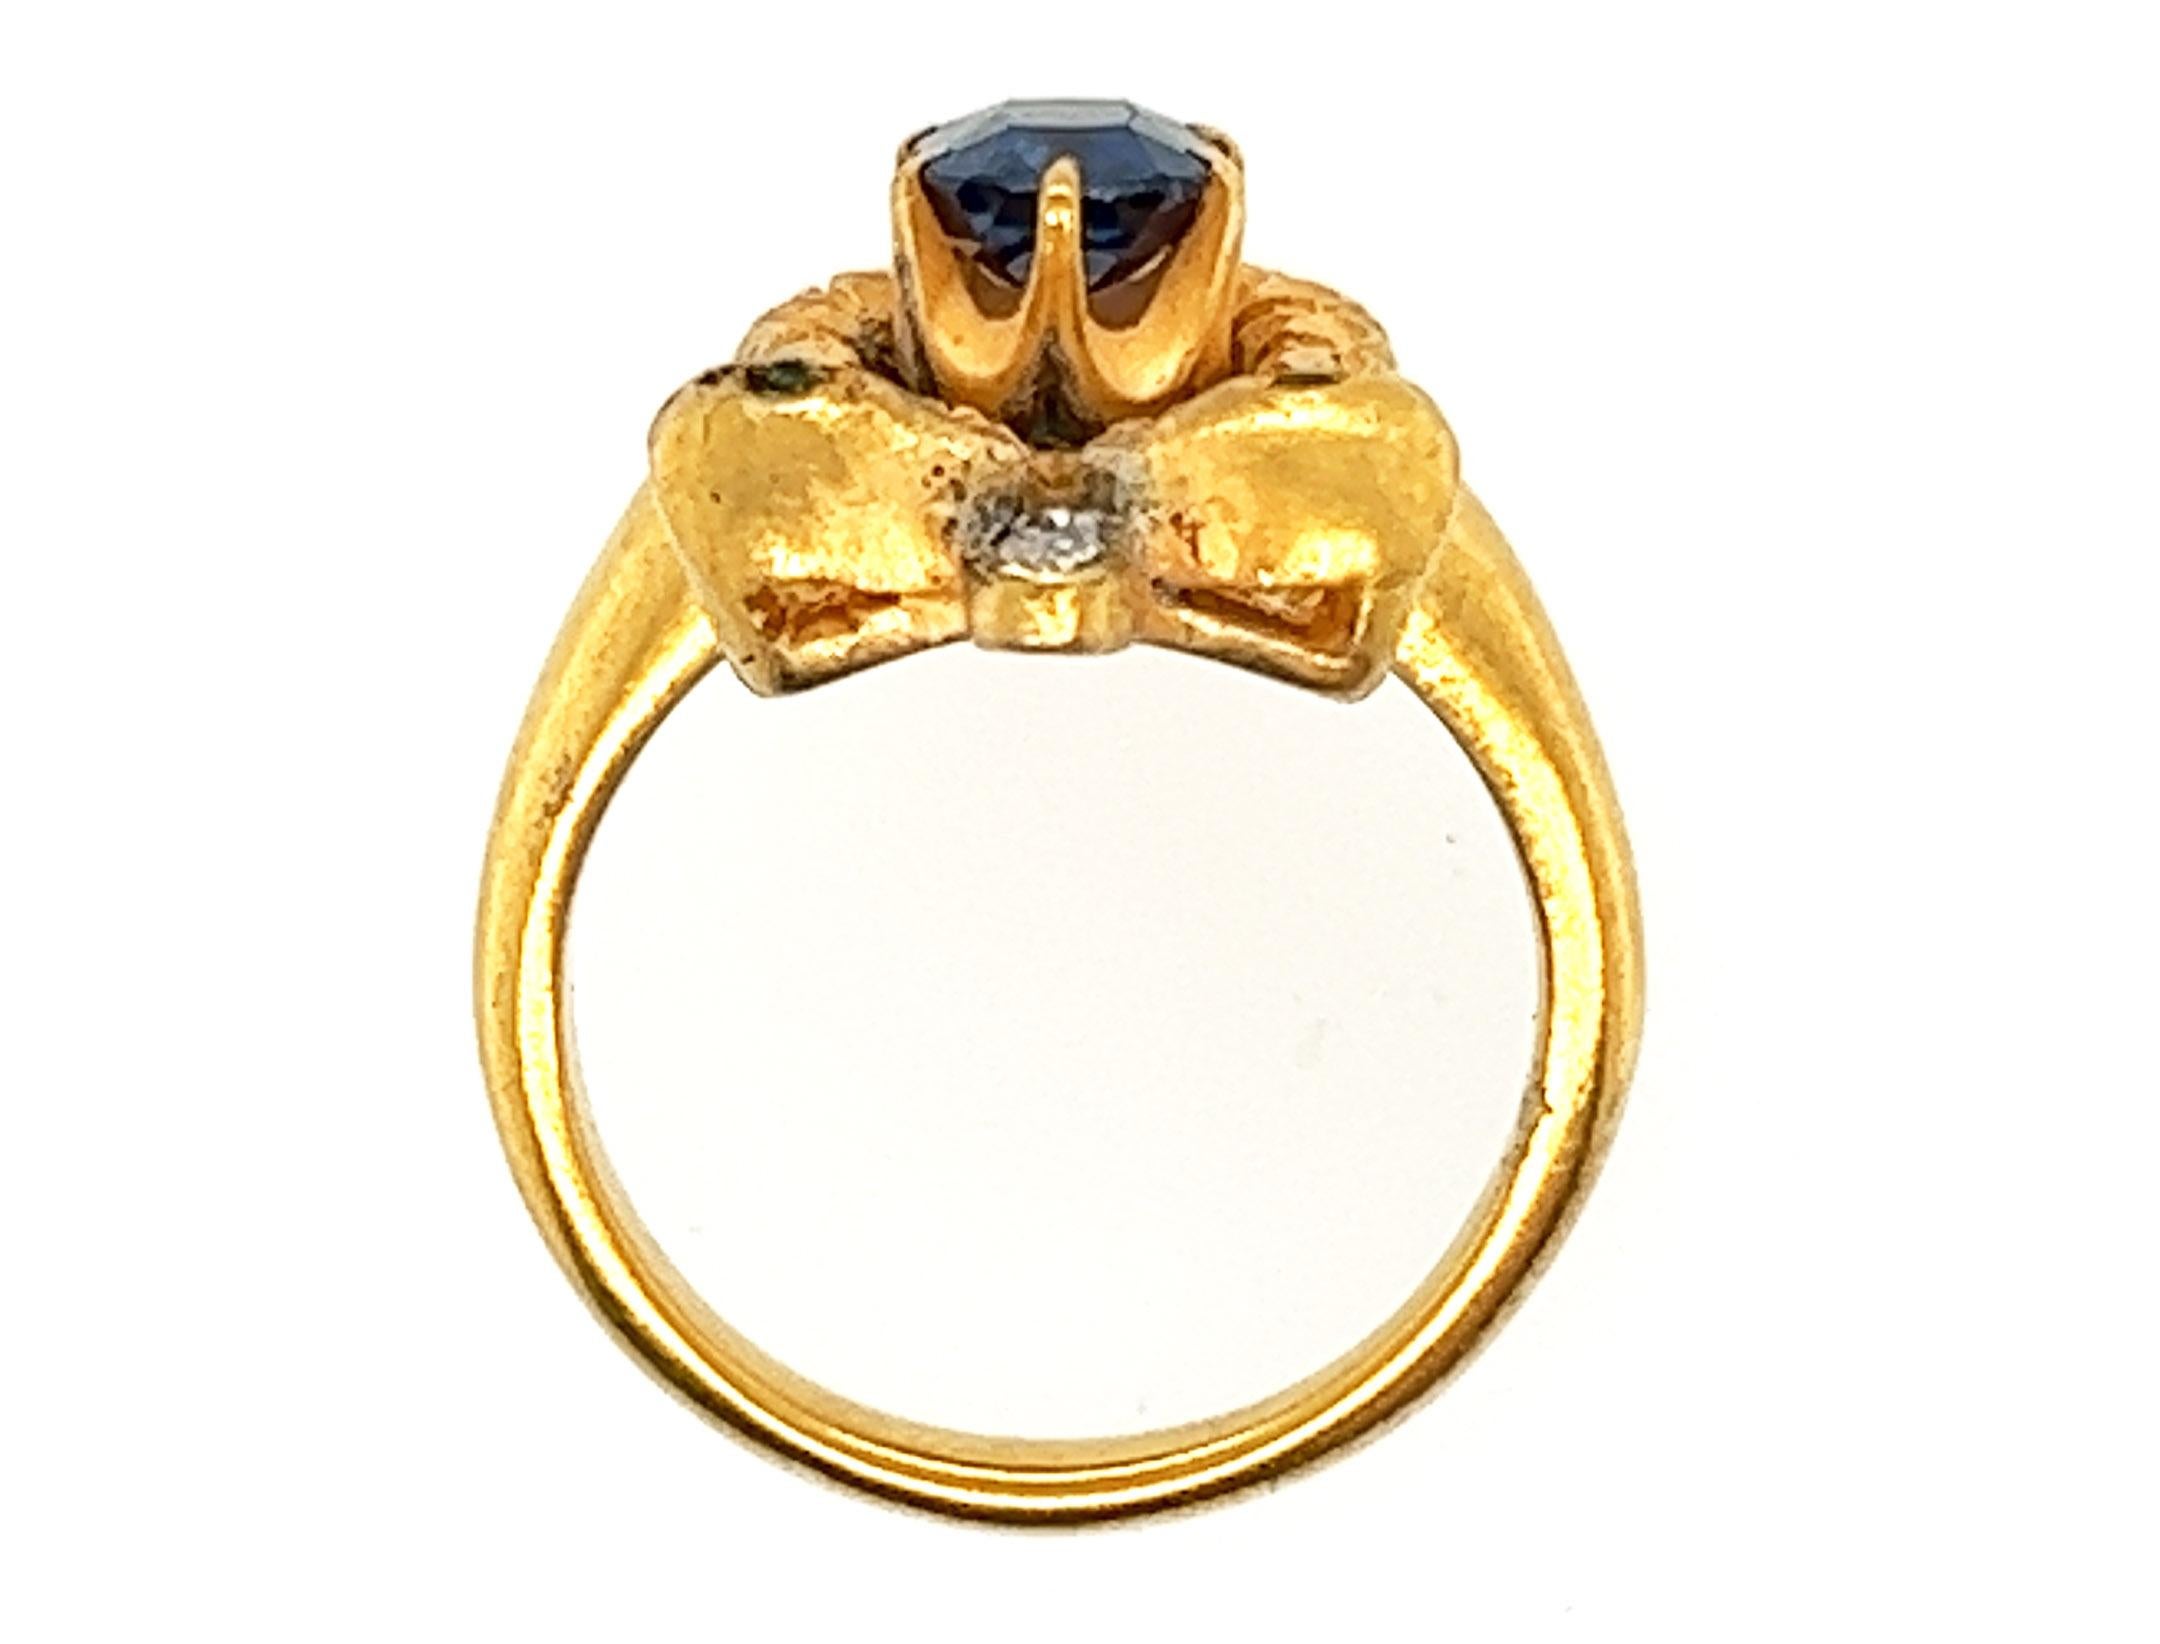 Discover the Allure of the 1890's with our Art Nouveau GIA No Heat Sapphire Snake Ring. This 1ct Cushion Cut Gem Set in 18K Gold Delivers Elegance and History in One Stunning Piece


Rare Piece Showcases a GIA Certified Unheated, Natural 1ct Cushion